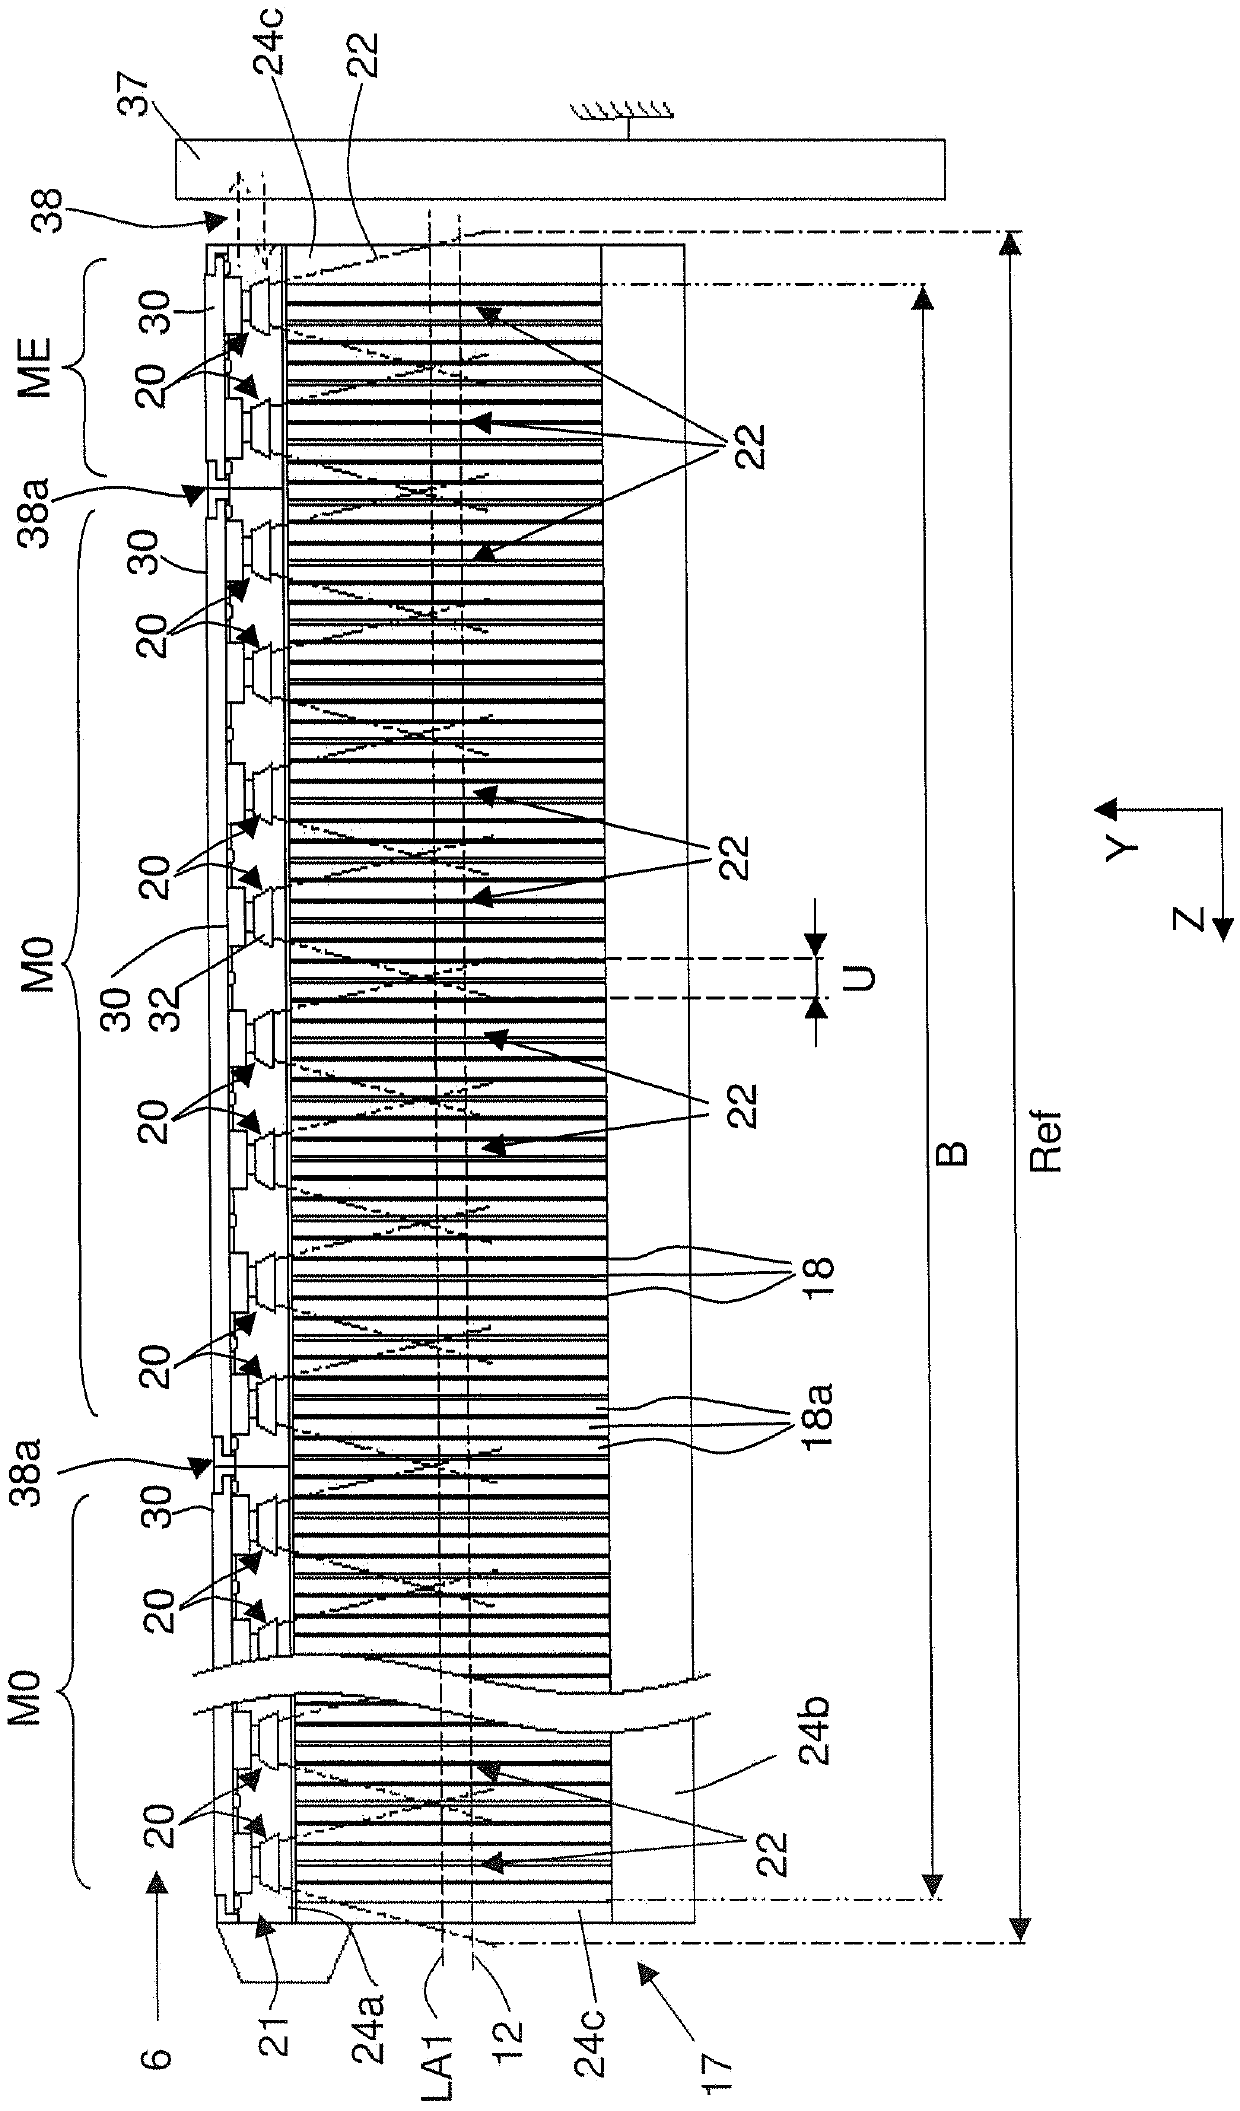 Monitoring device for a weaving machine, weaving machine, and method for monitoring